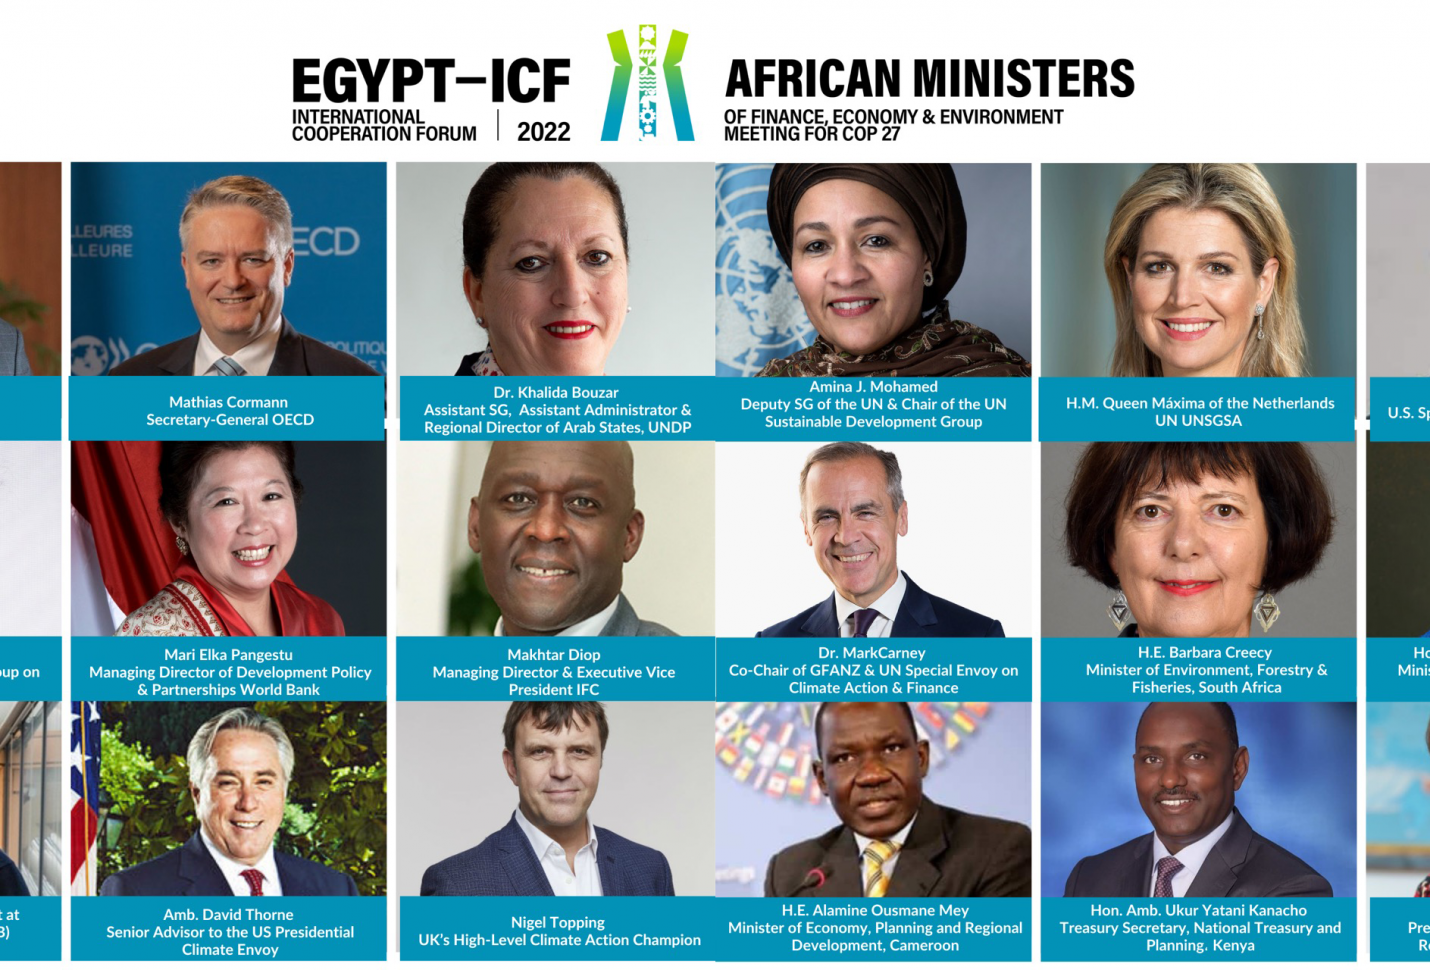 Prominent climate leaders to take part in Egypt-ICF on Africa’s climate change